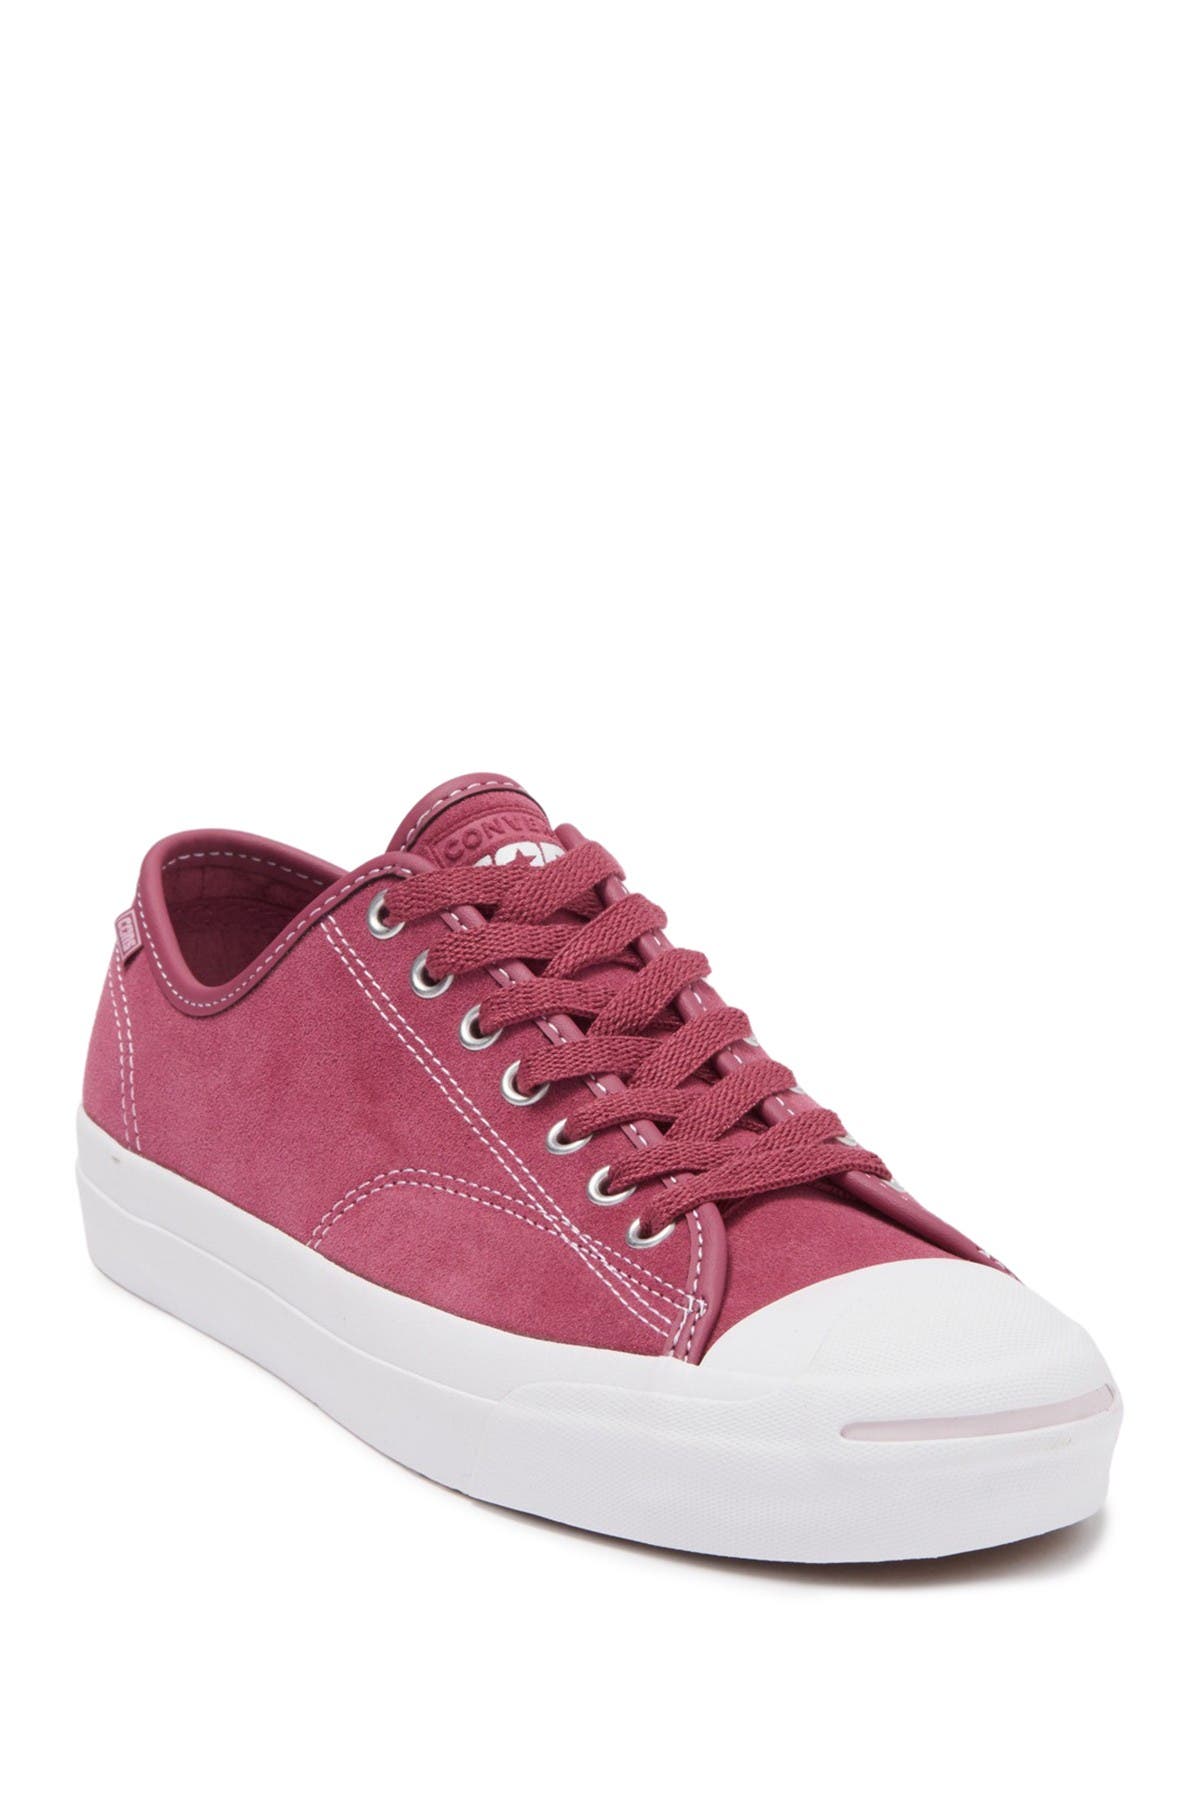 jack purcell pink